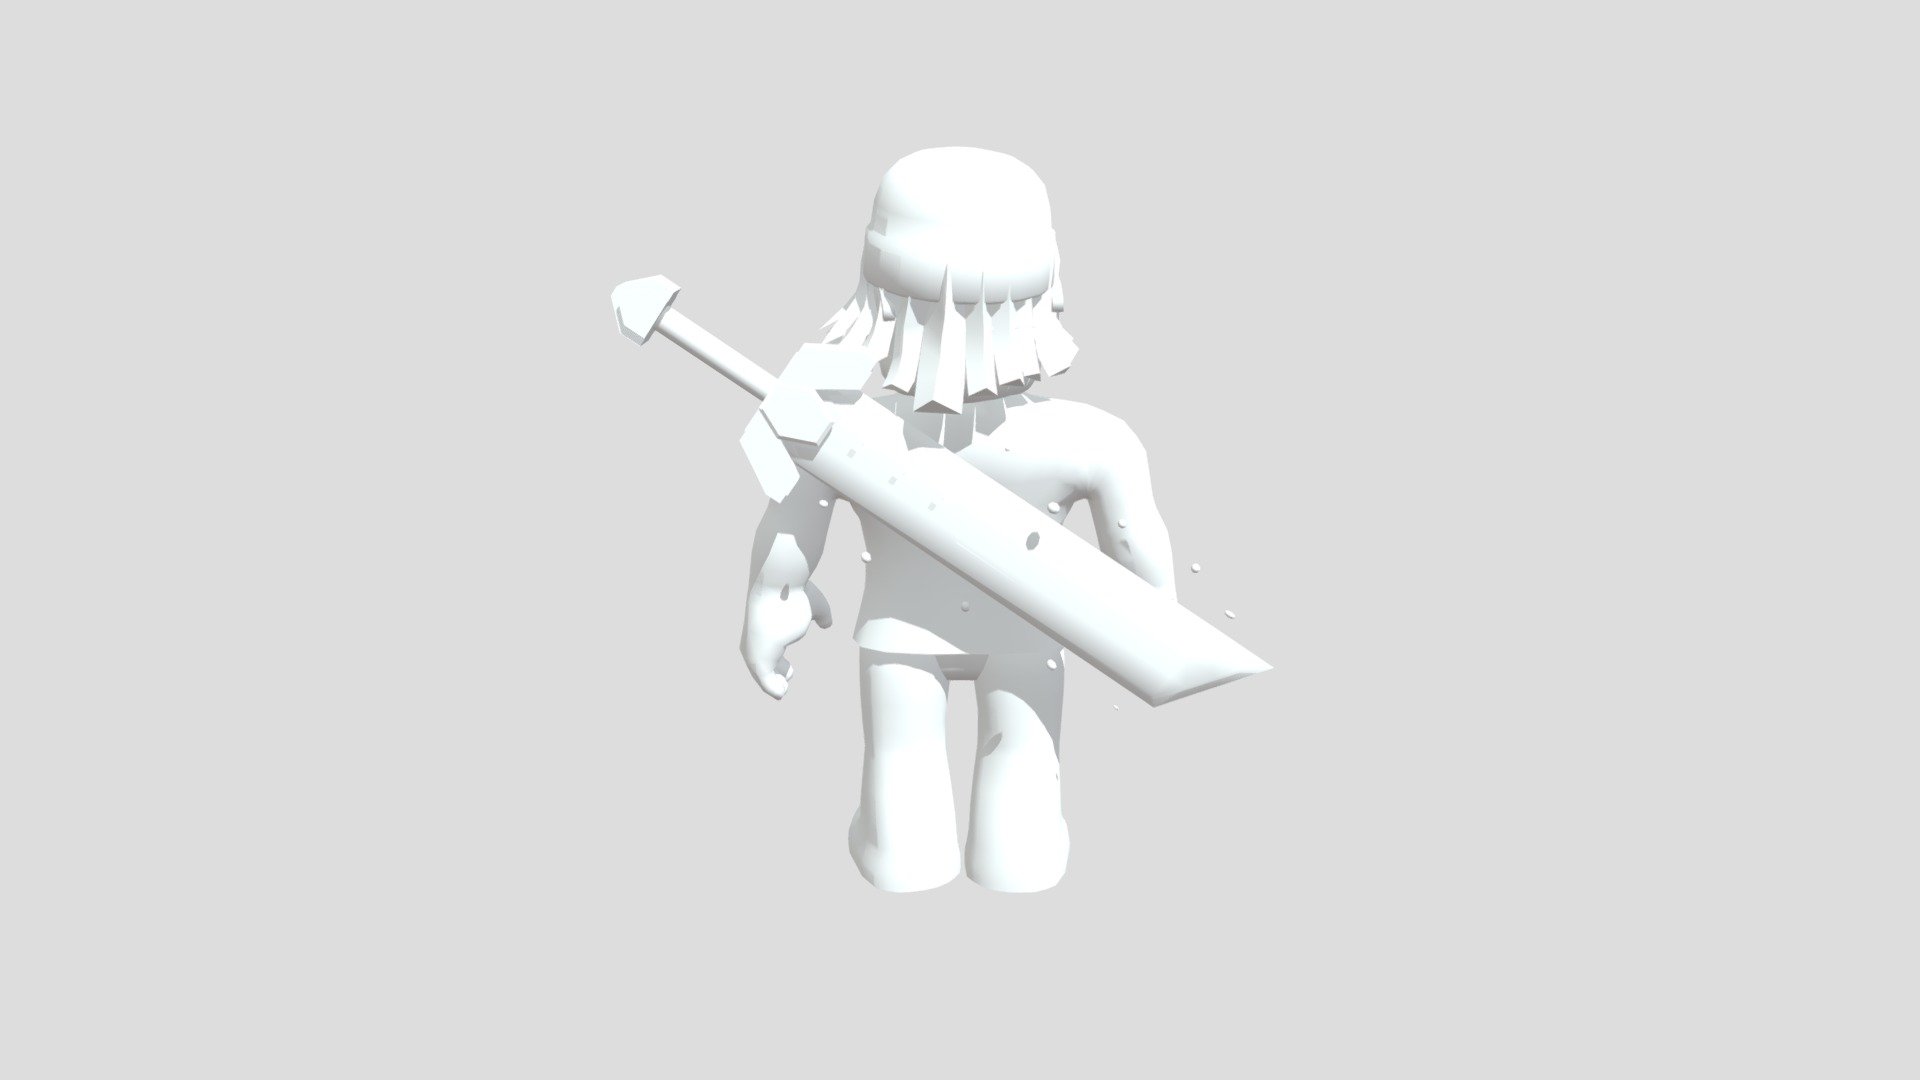 Roblox Character Model 3d Model By Dimensional Games [9adce16] Sketchfab